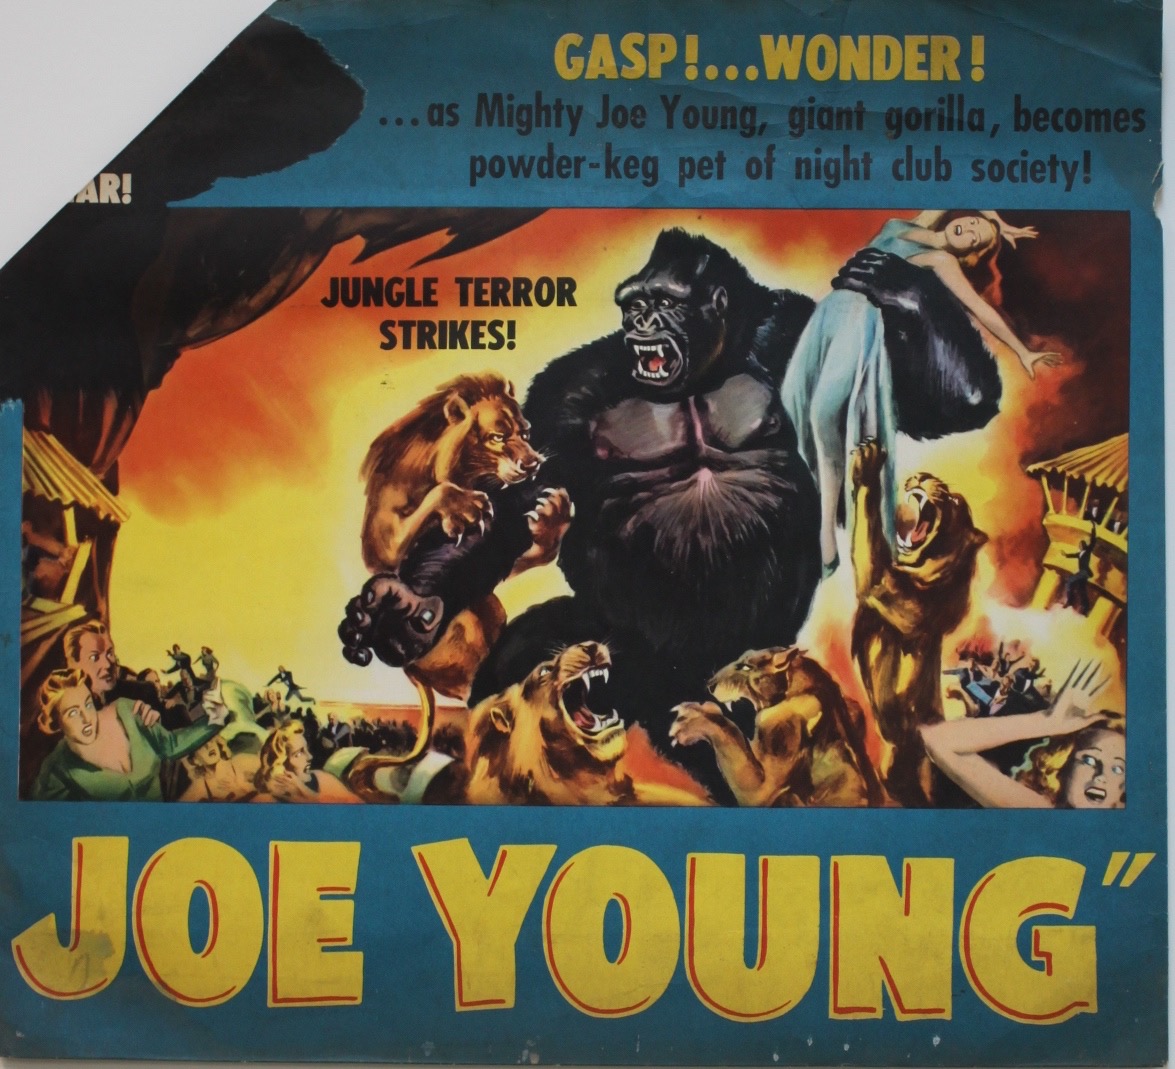 Mighty Joe Young Pressbook With Jacket
1949 - Primary